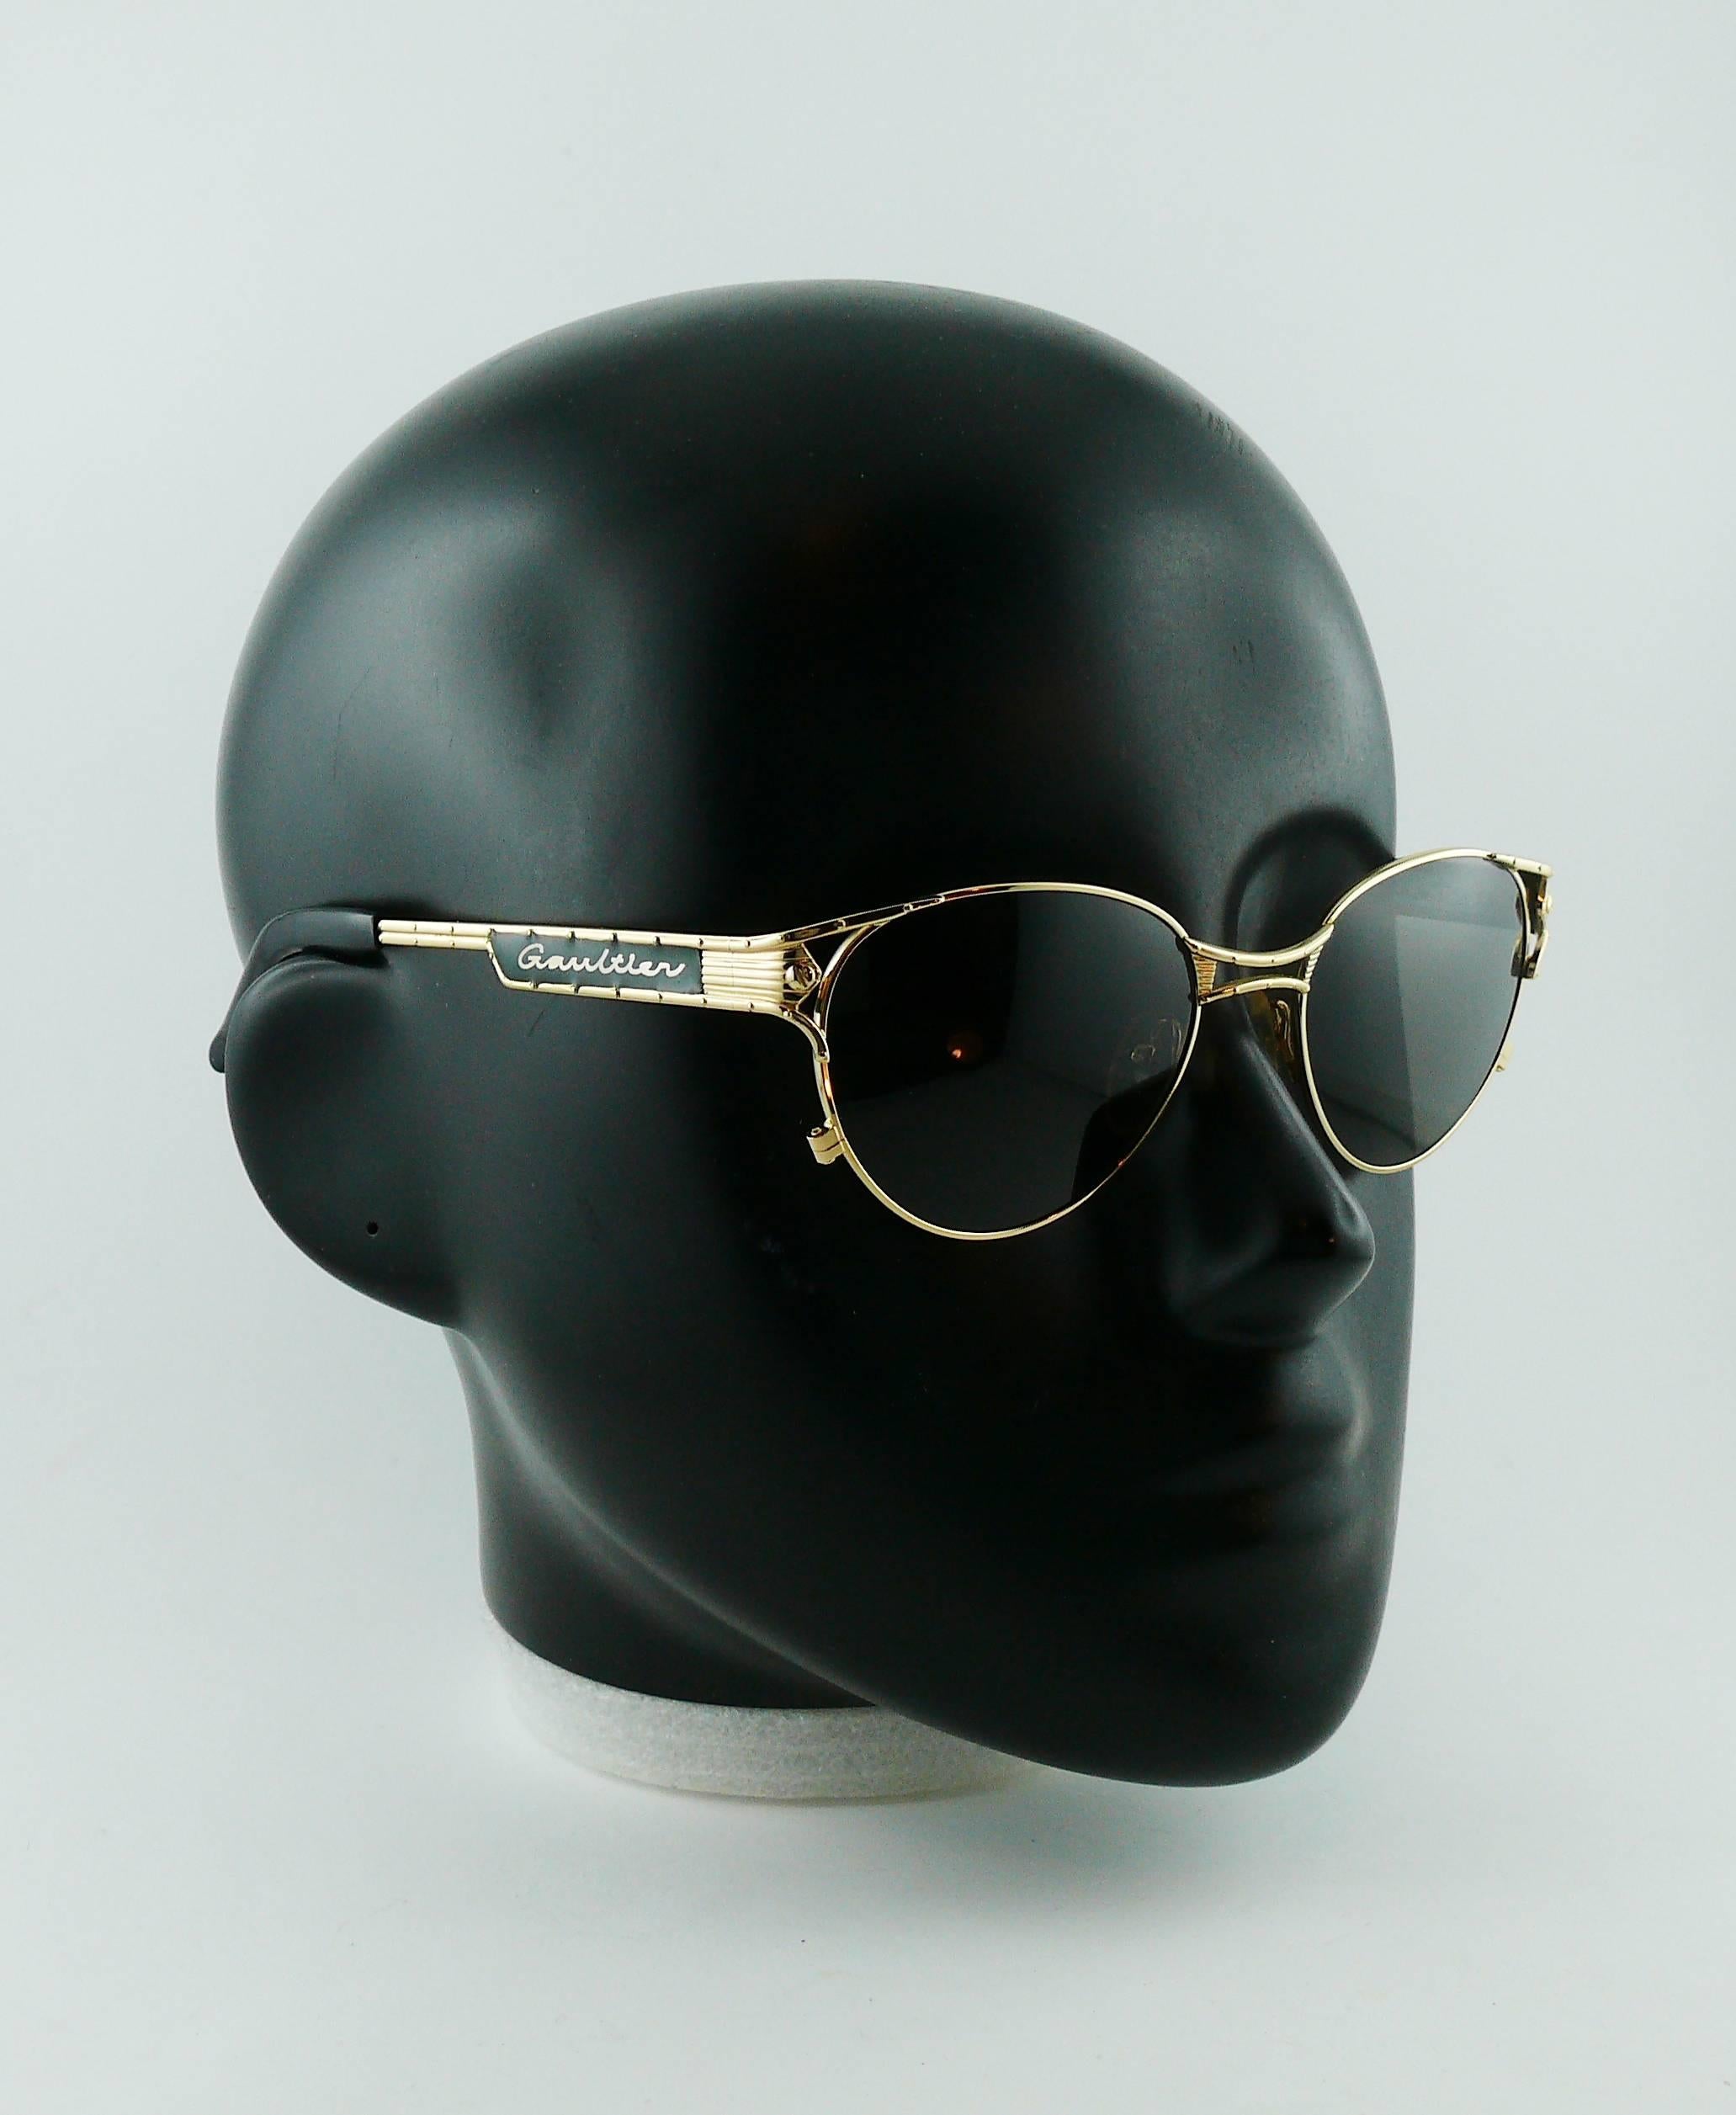 JEAN PAUL GAULTIER vintage 1990s sunglasses.

Gold toned frames with rivets details and green resin inlaid featuring 